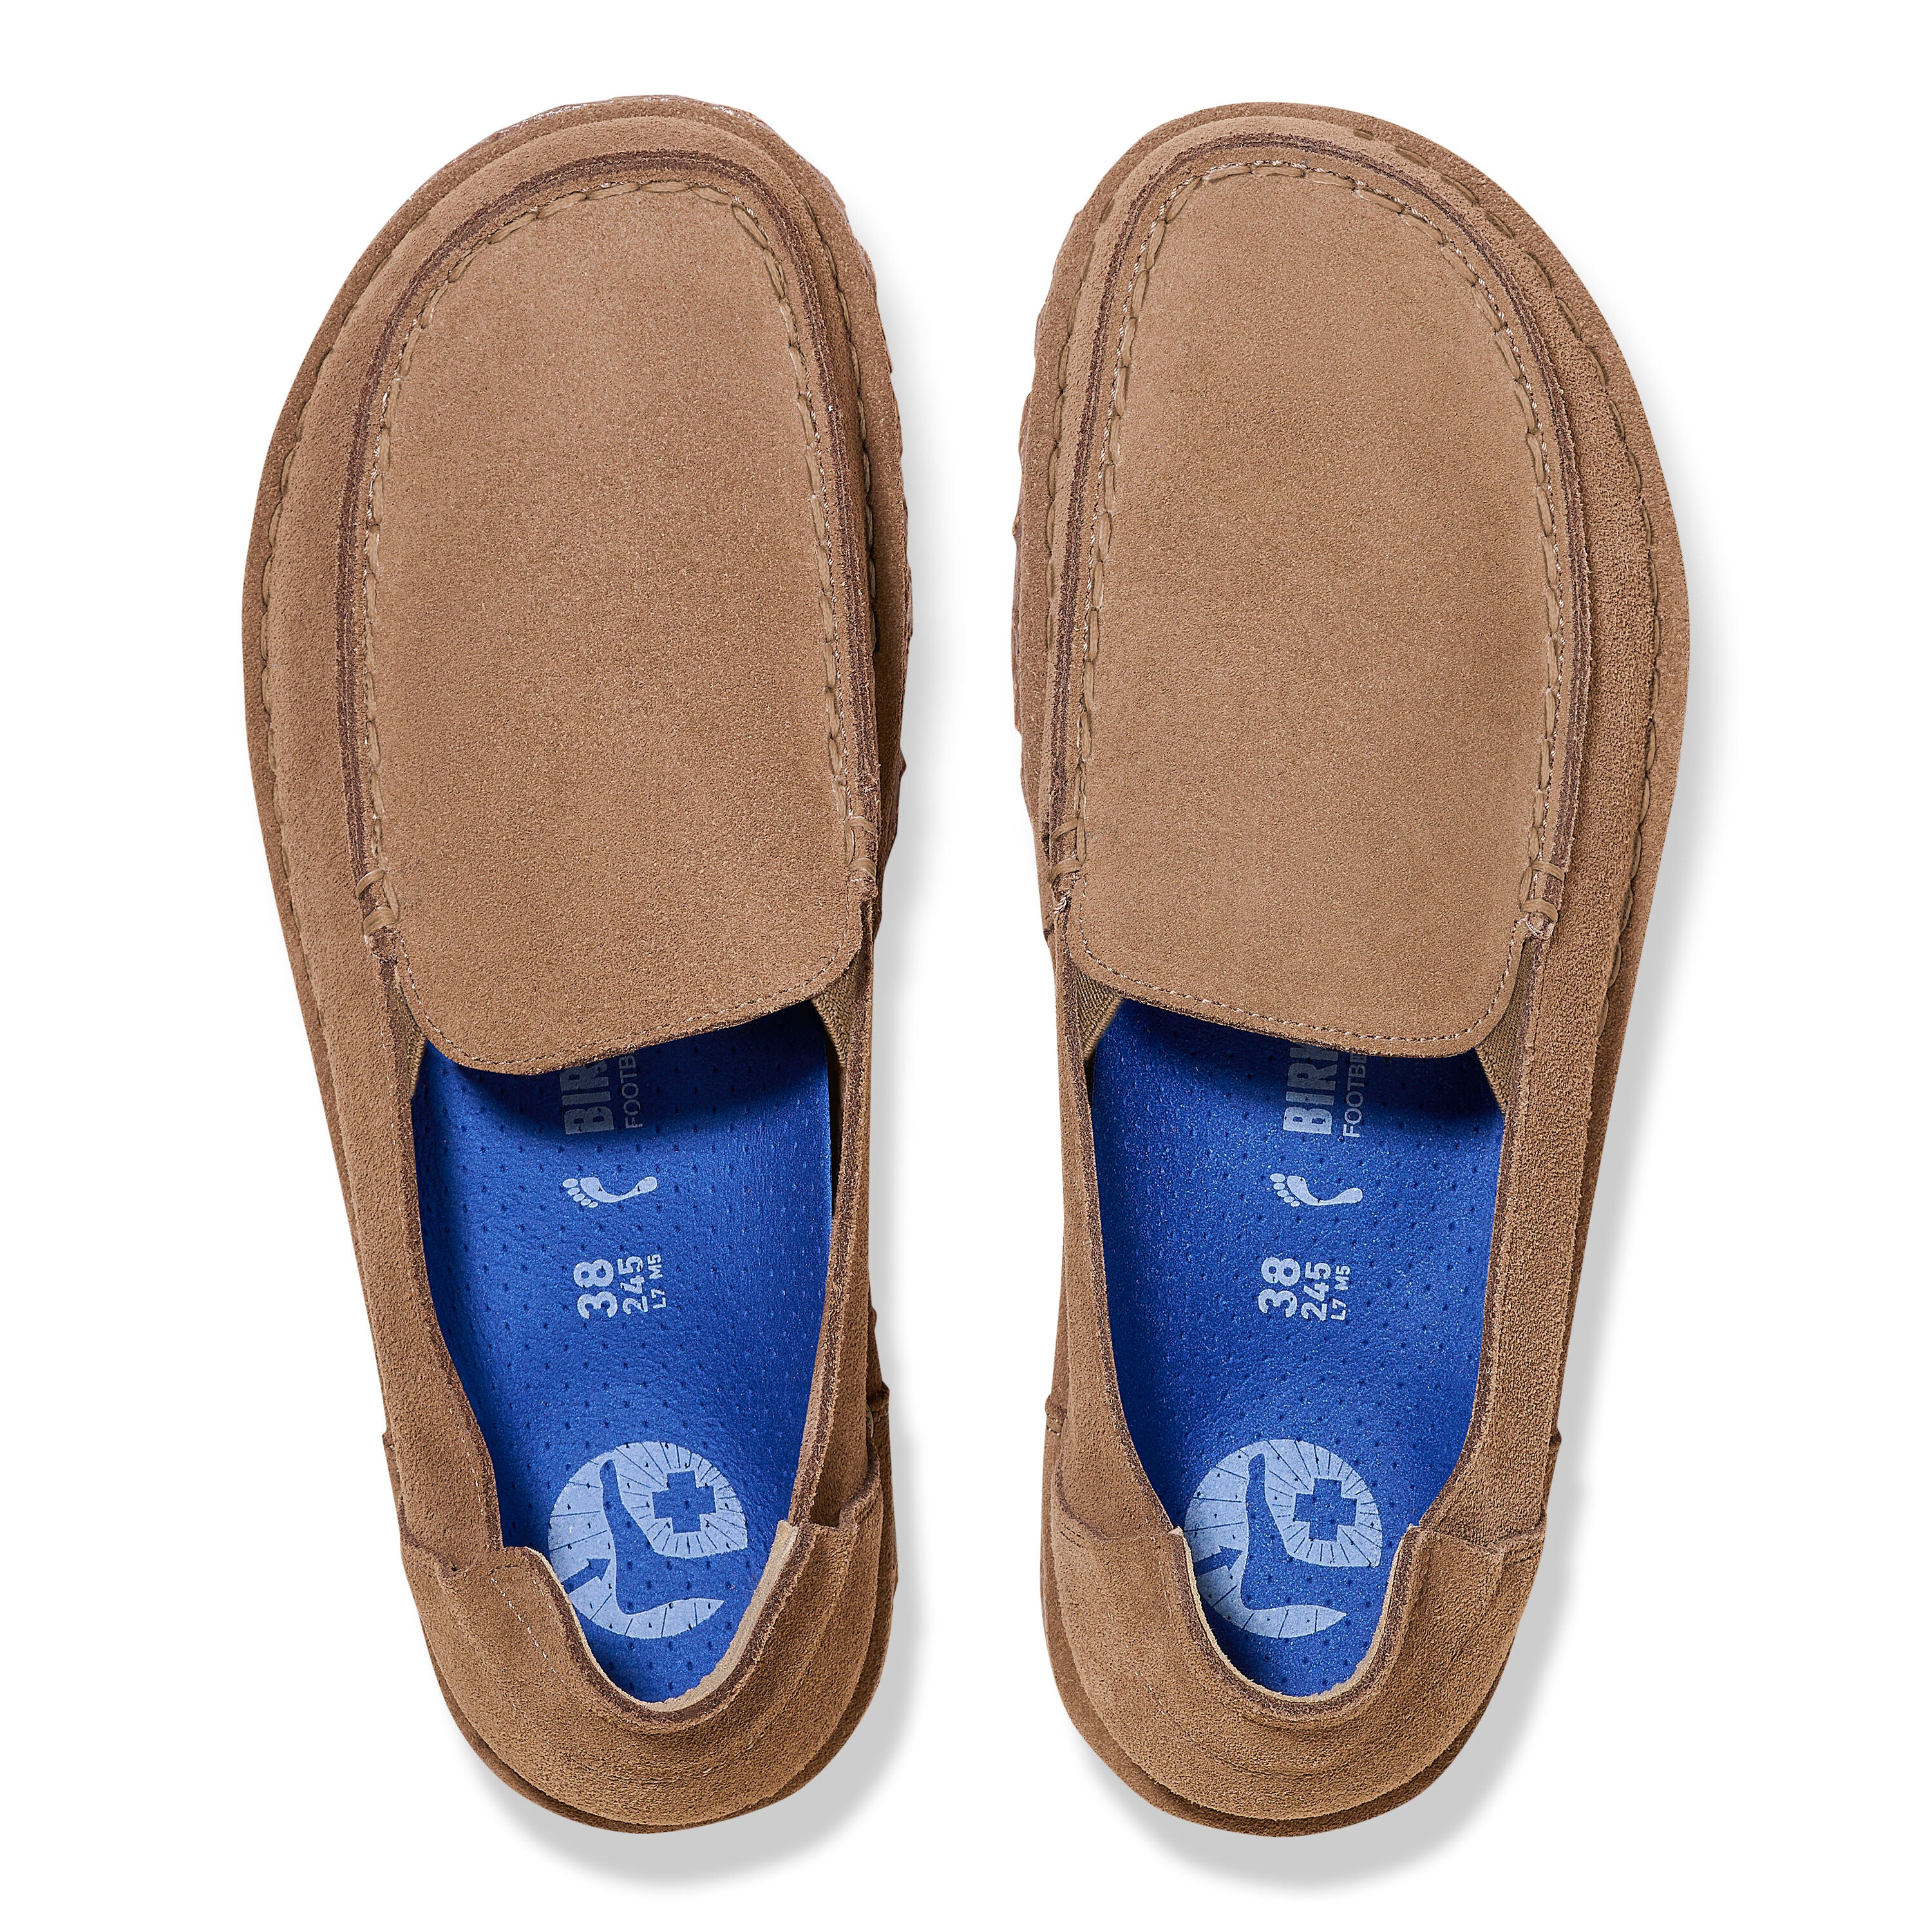 Birkenstock Limited Edition Utti Slip On taupe suede